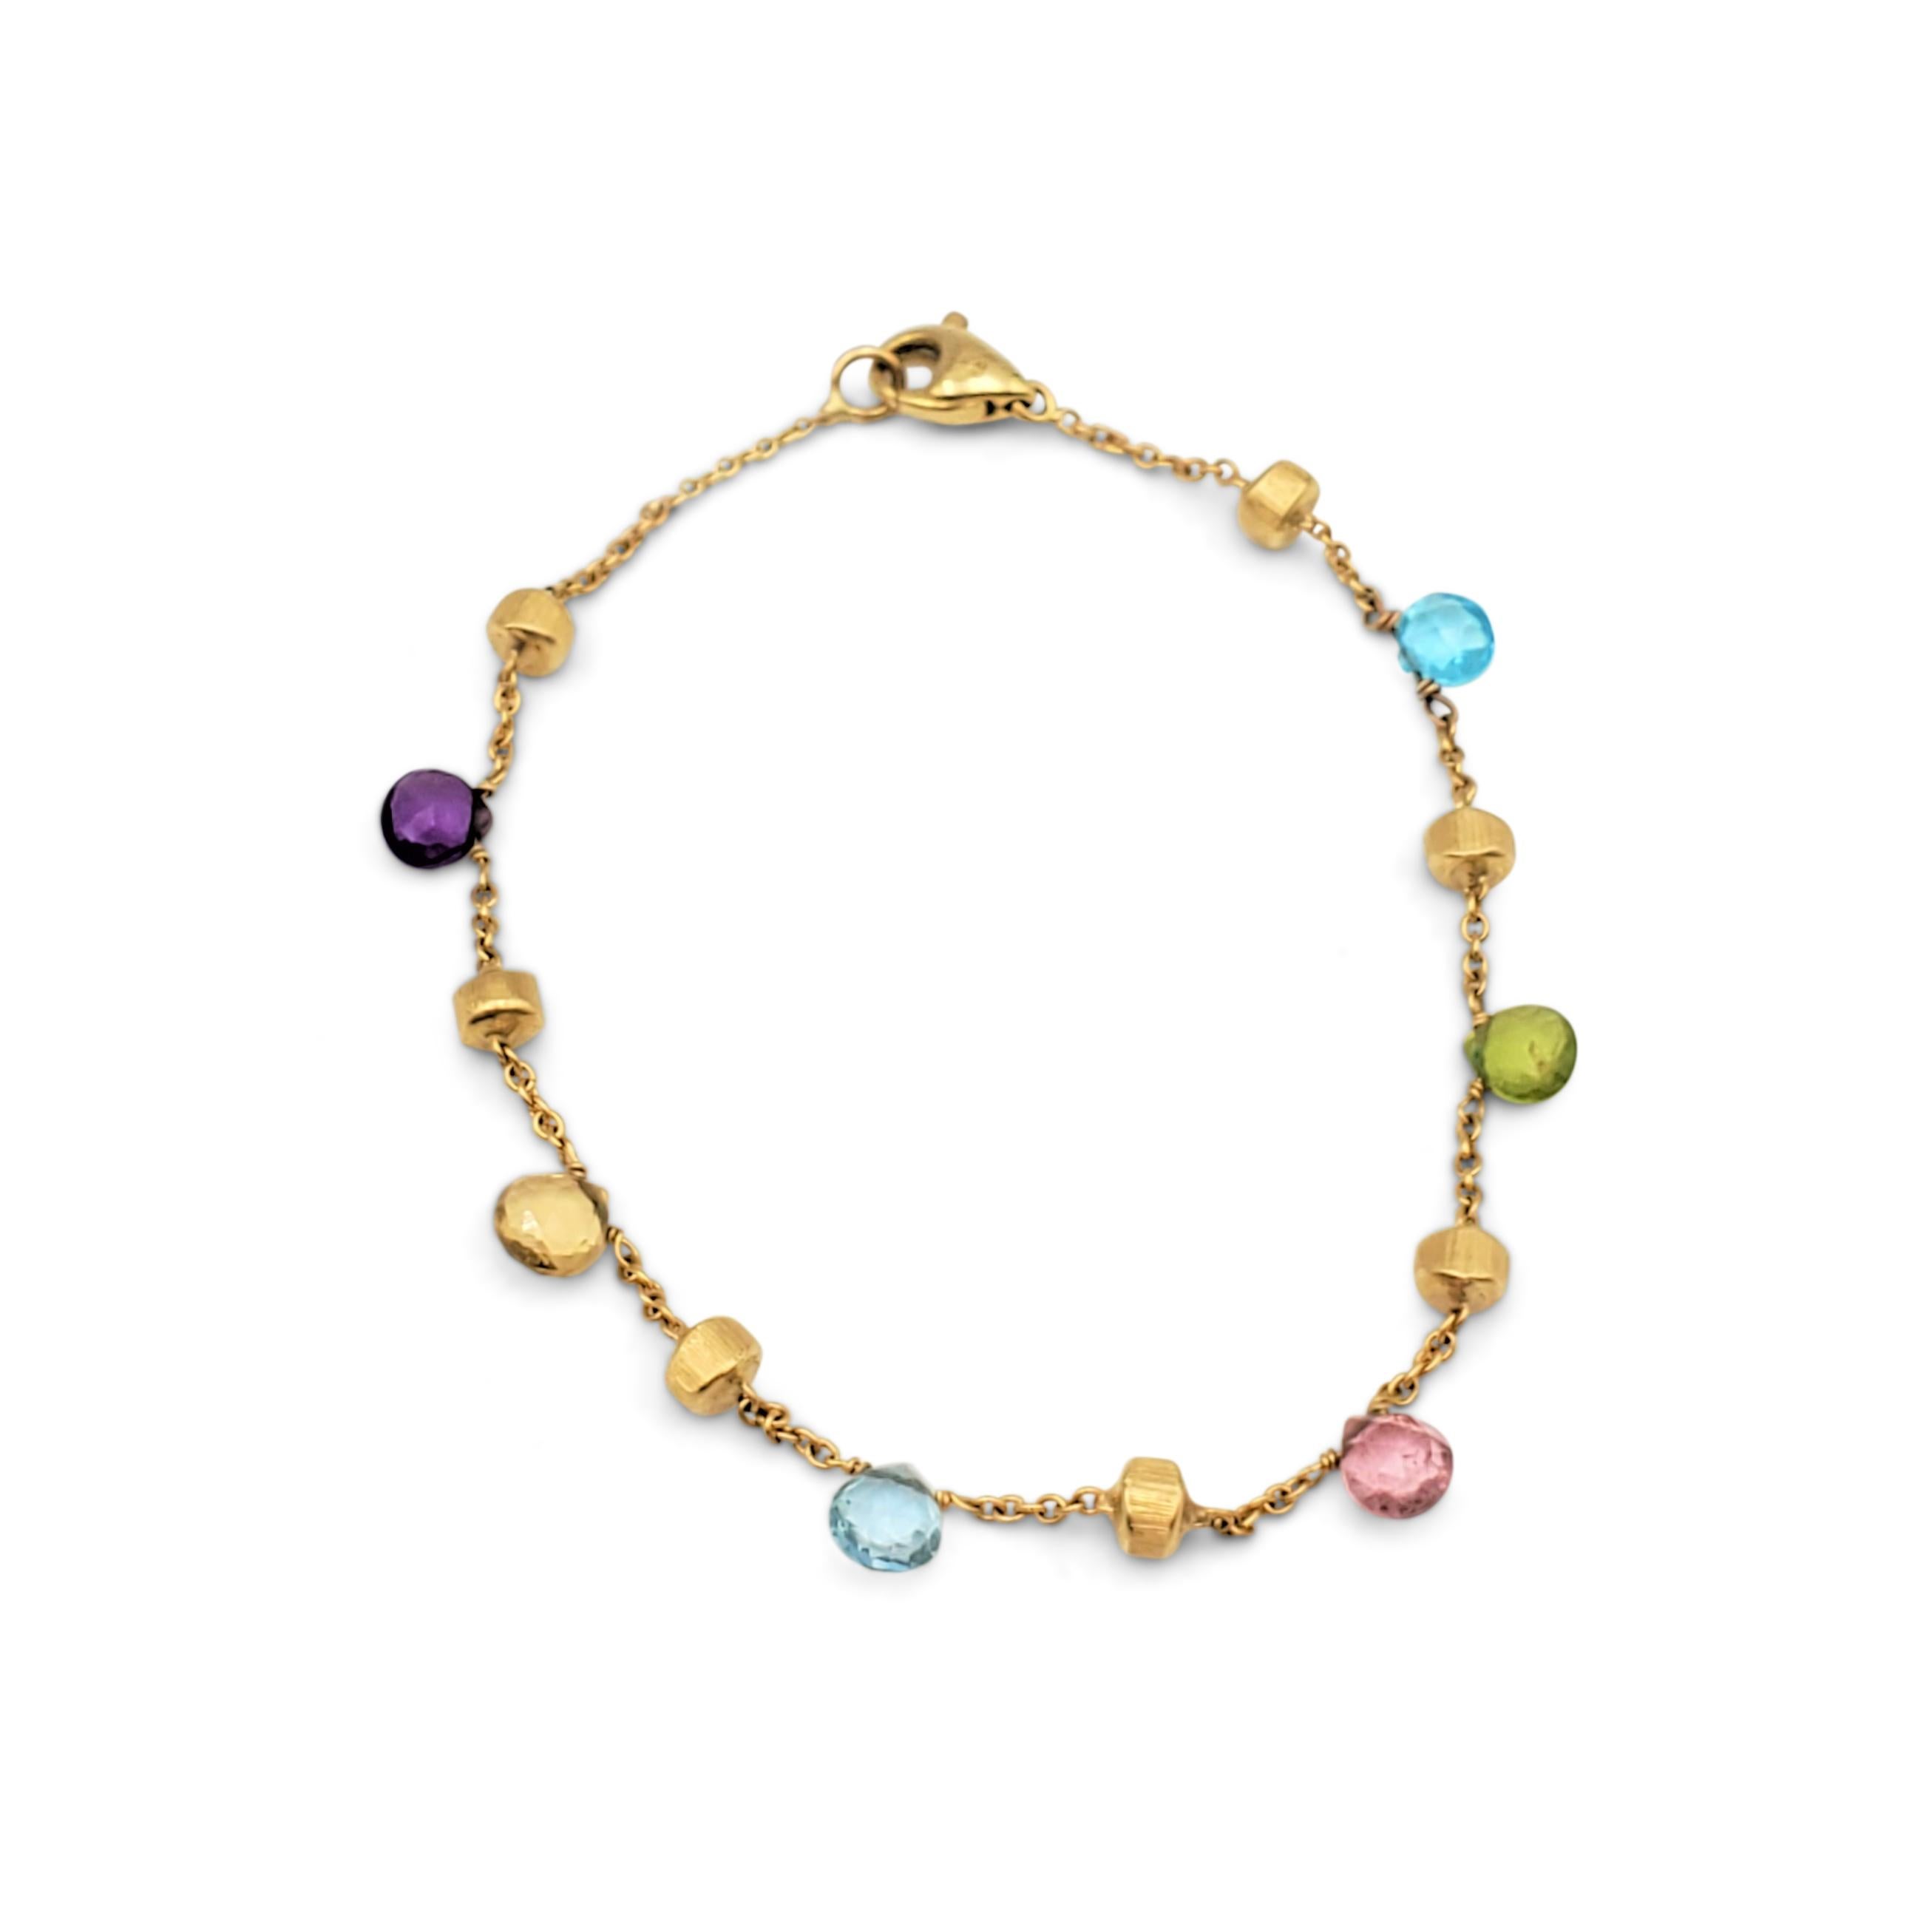 Authentic Marco Bicego bracelet from the 'Paradise' collection. A vibrant blend of semi-precious stones on a delicate link chain with hand-engraved, 18k gold stations. The bracelet may include amethyst, light amethyst, green amethyst, iolite,